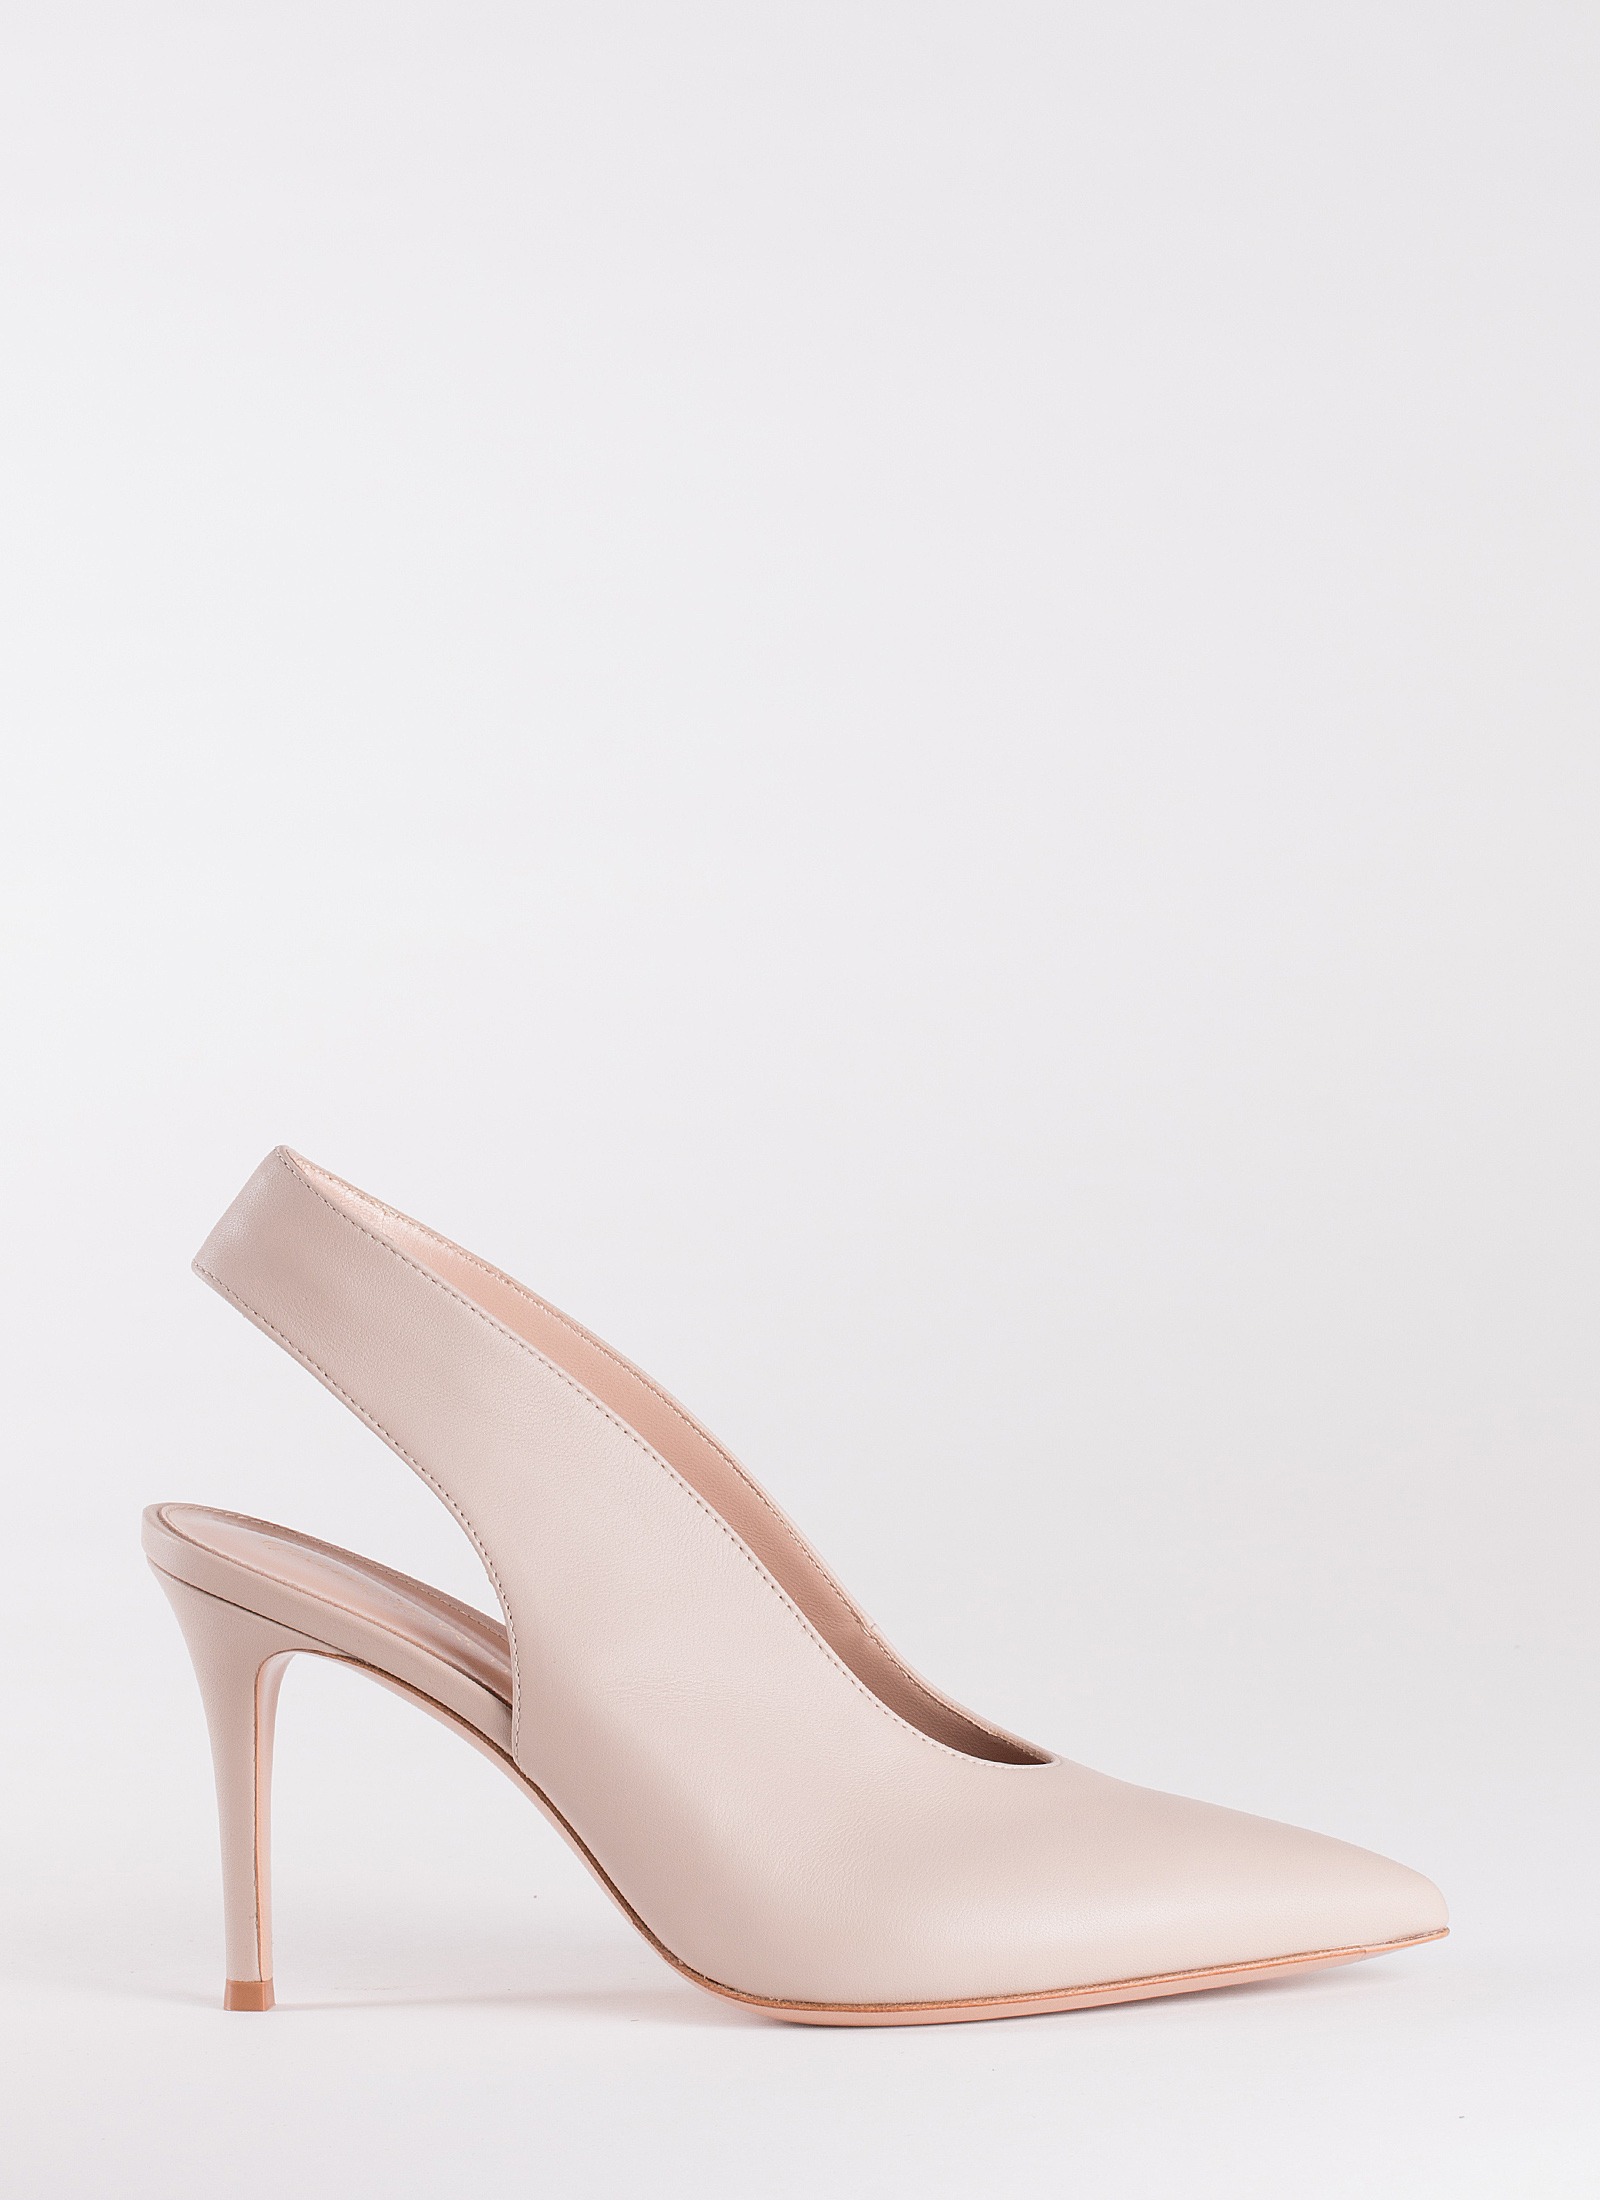 LEATHER SLINGBACK SHOES "DELTA" - GIANVITO ROSSI